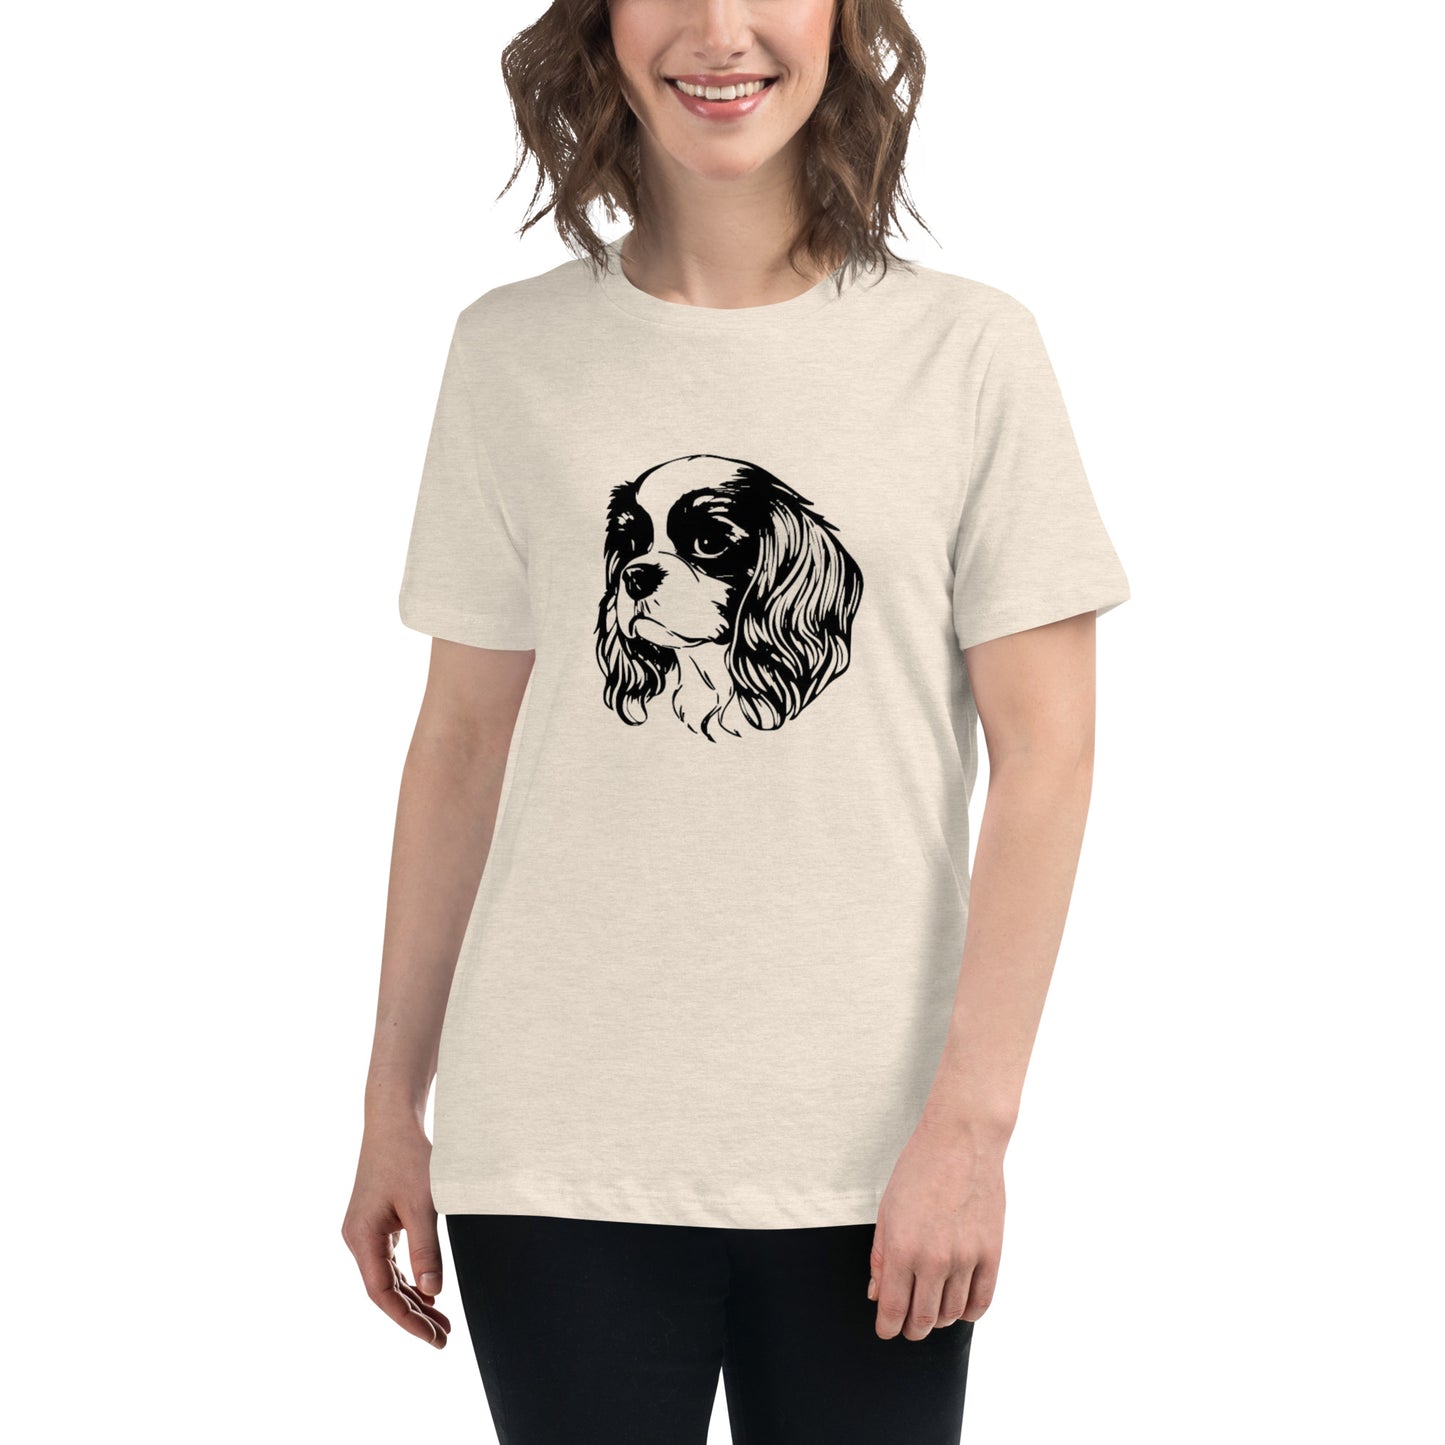 Cavalier King Charles Spaniel Graphic Women's Relaxed T-Shirt